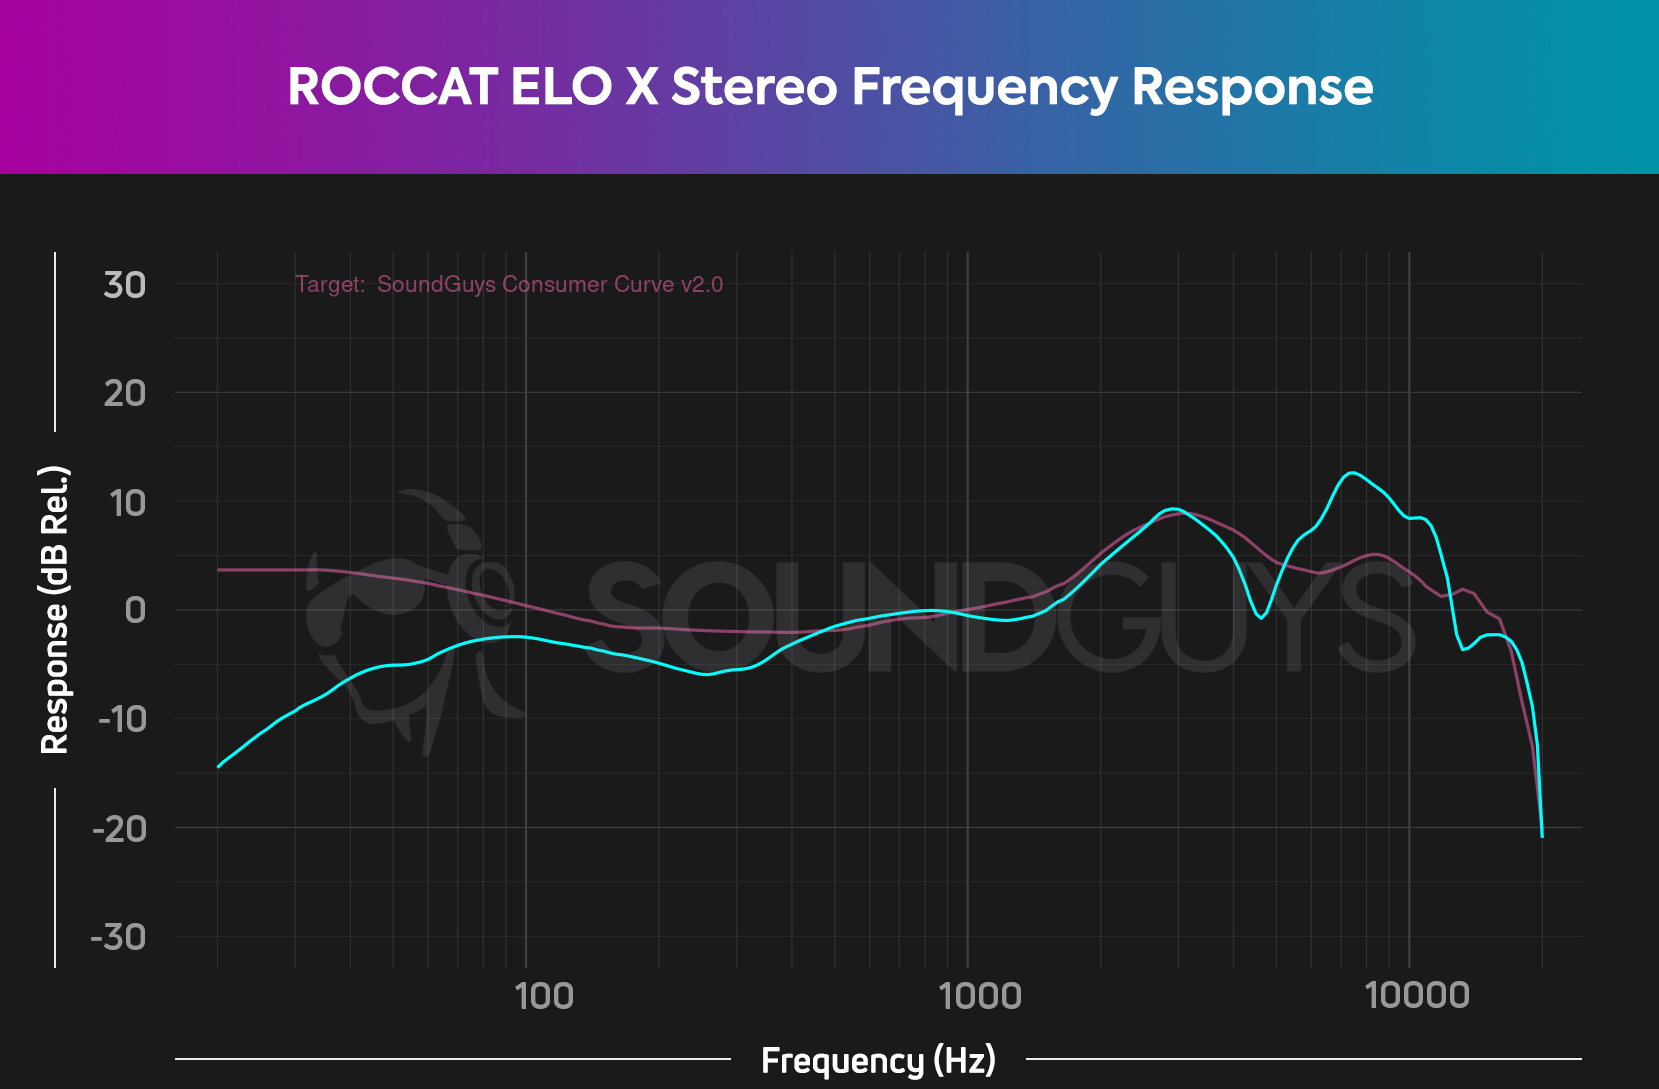 The frequency response chart for the ROCCAT Elo X Stereo.